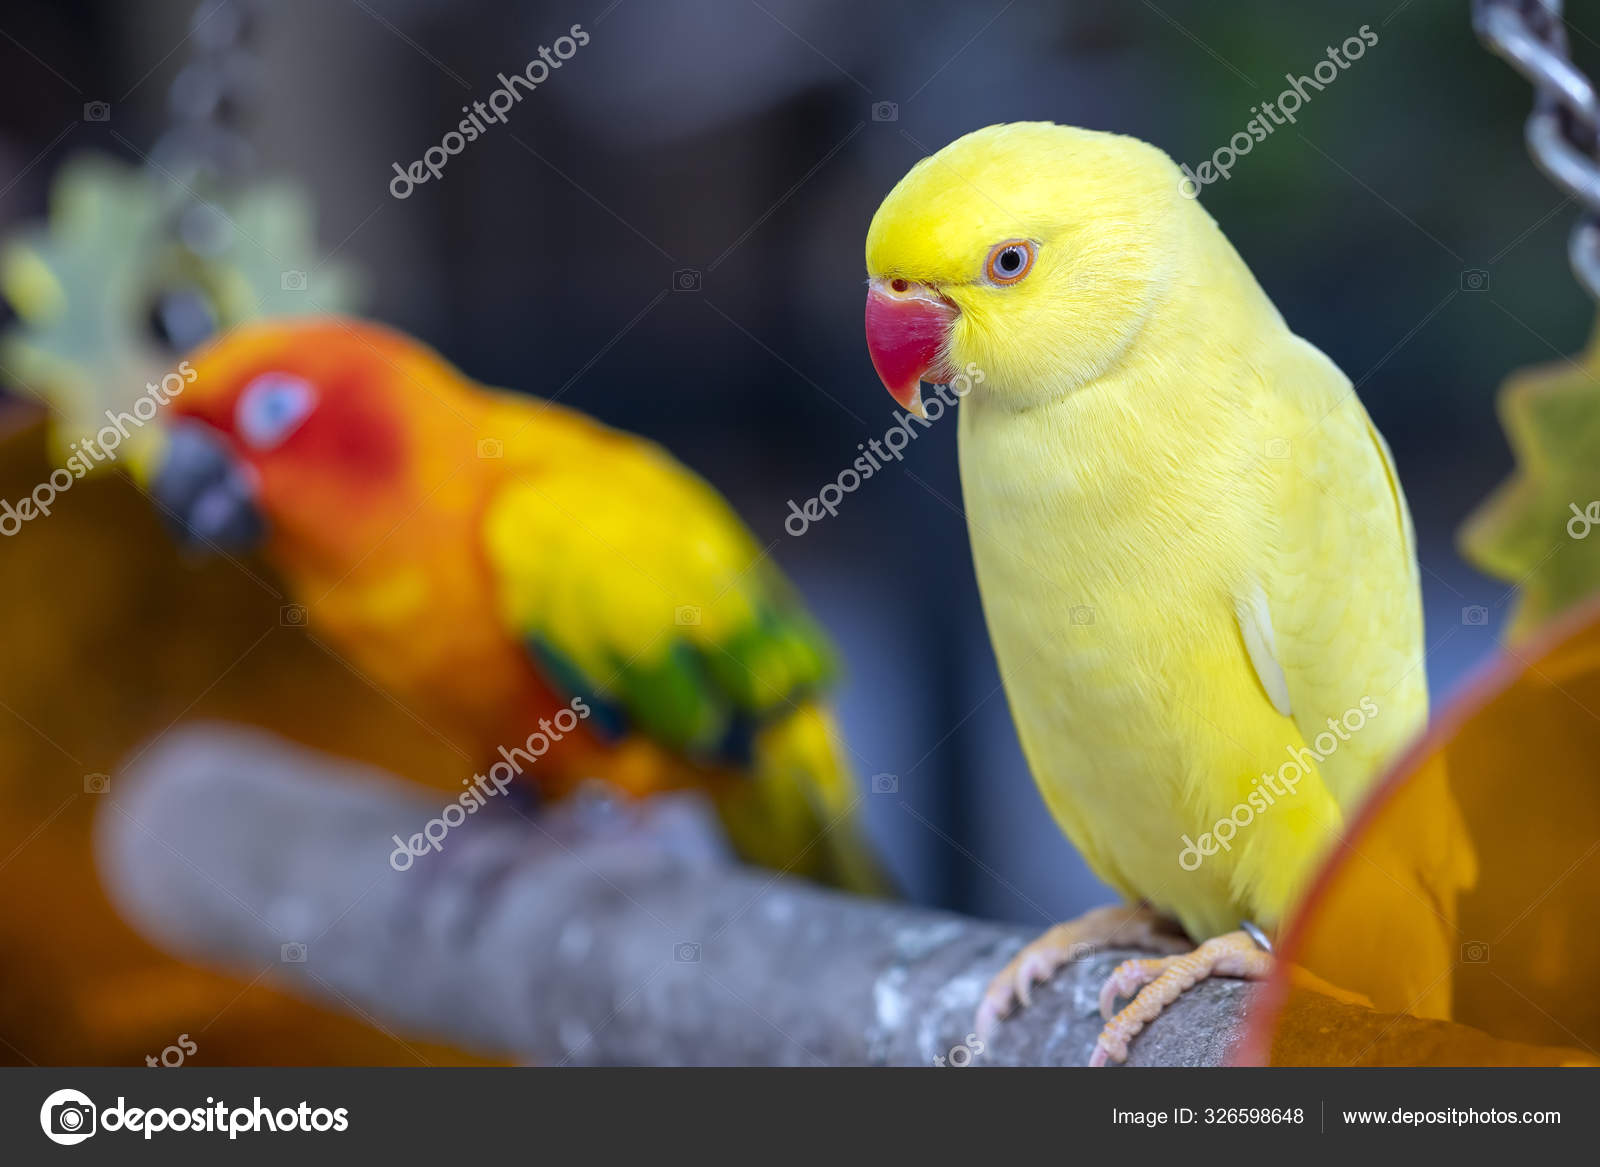 Portrait Yellow Indian Ringneck Parakeet Reserve Bird Domesticated Raised Home Stock Photo C Huythoai1978 Gmail Com 326598648,Data Entry Jobs Online Free To Join